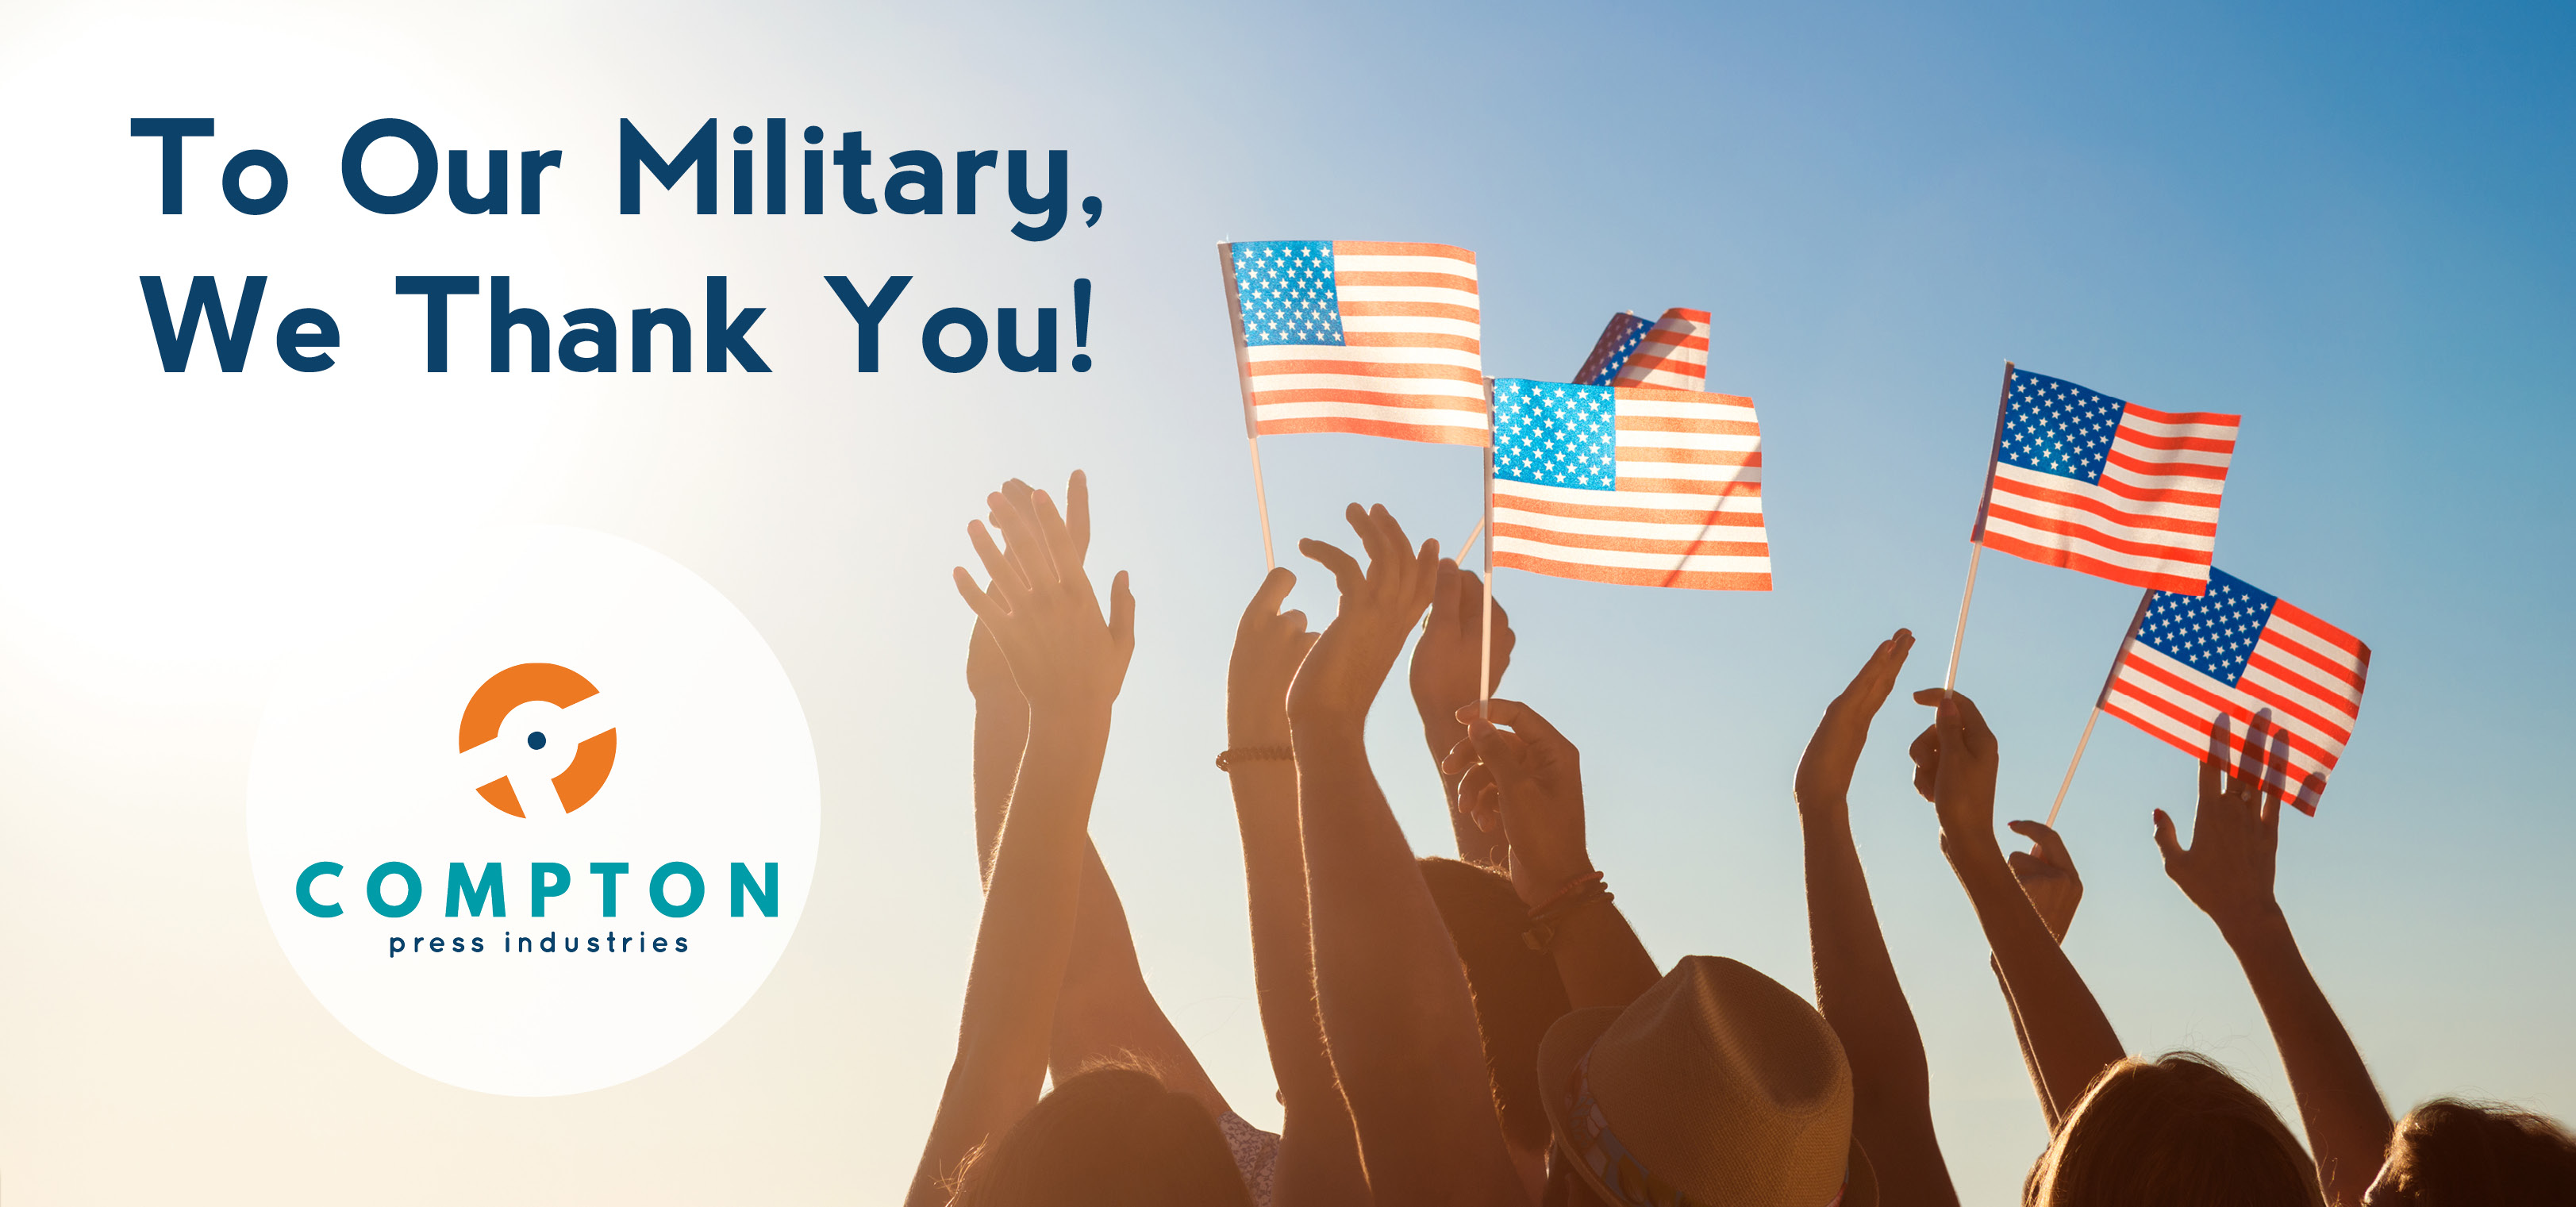 To Our Military, We Thank You